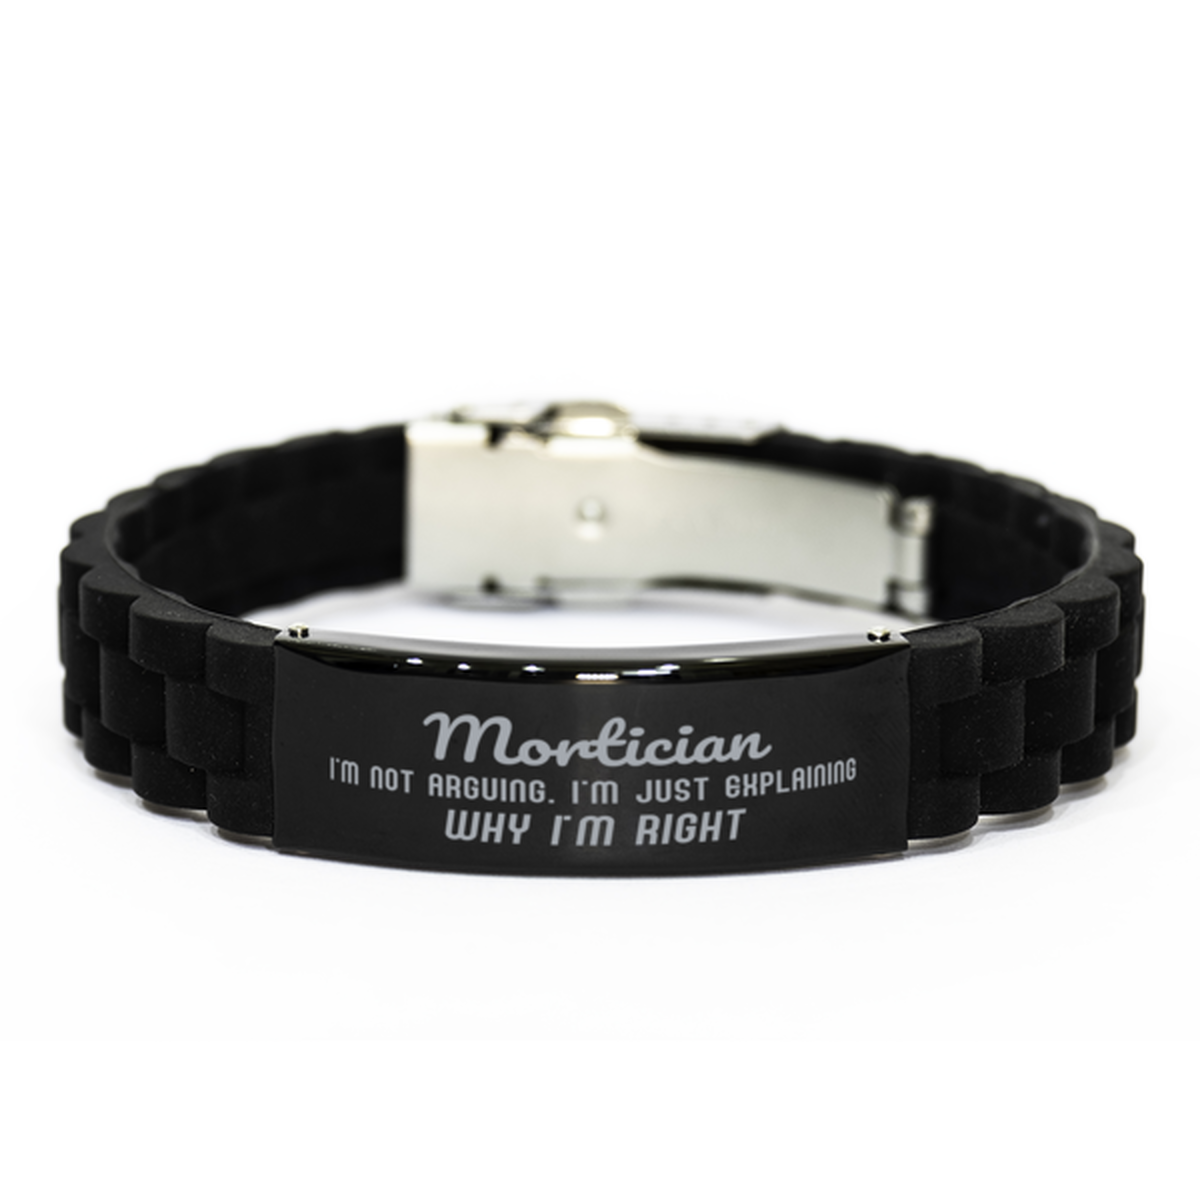 Mortician I'm not Arguing. I'm Just Explaining Why I'm RIGHT Black Glidelock Clasp Bracelet, Funny Saying Quote Mortician Gifts For Mortician Graduation Birthday Christmas Gifts for Men Women Coworker